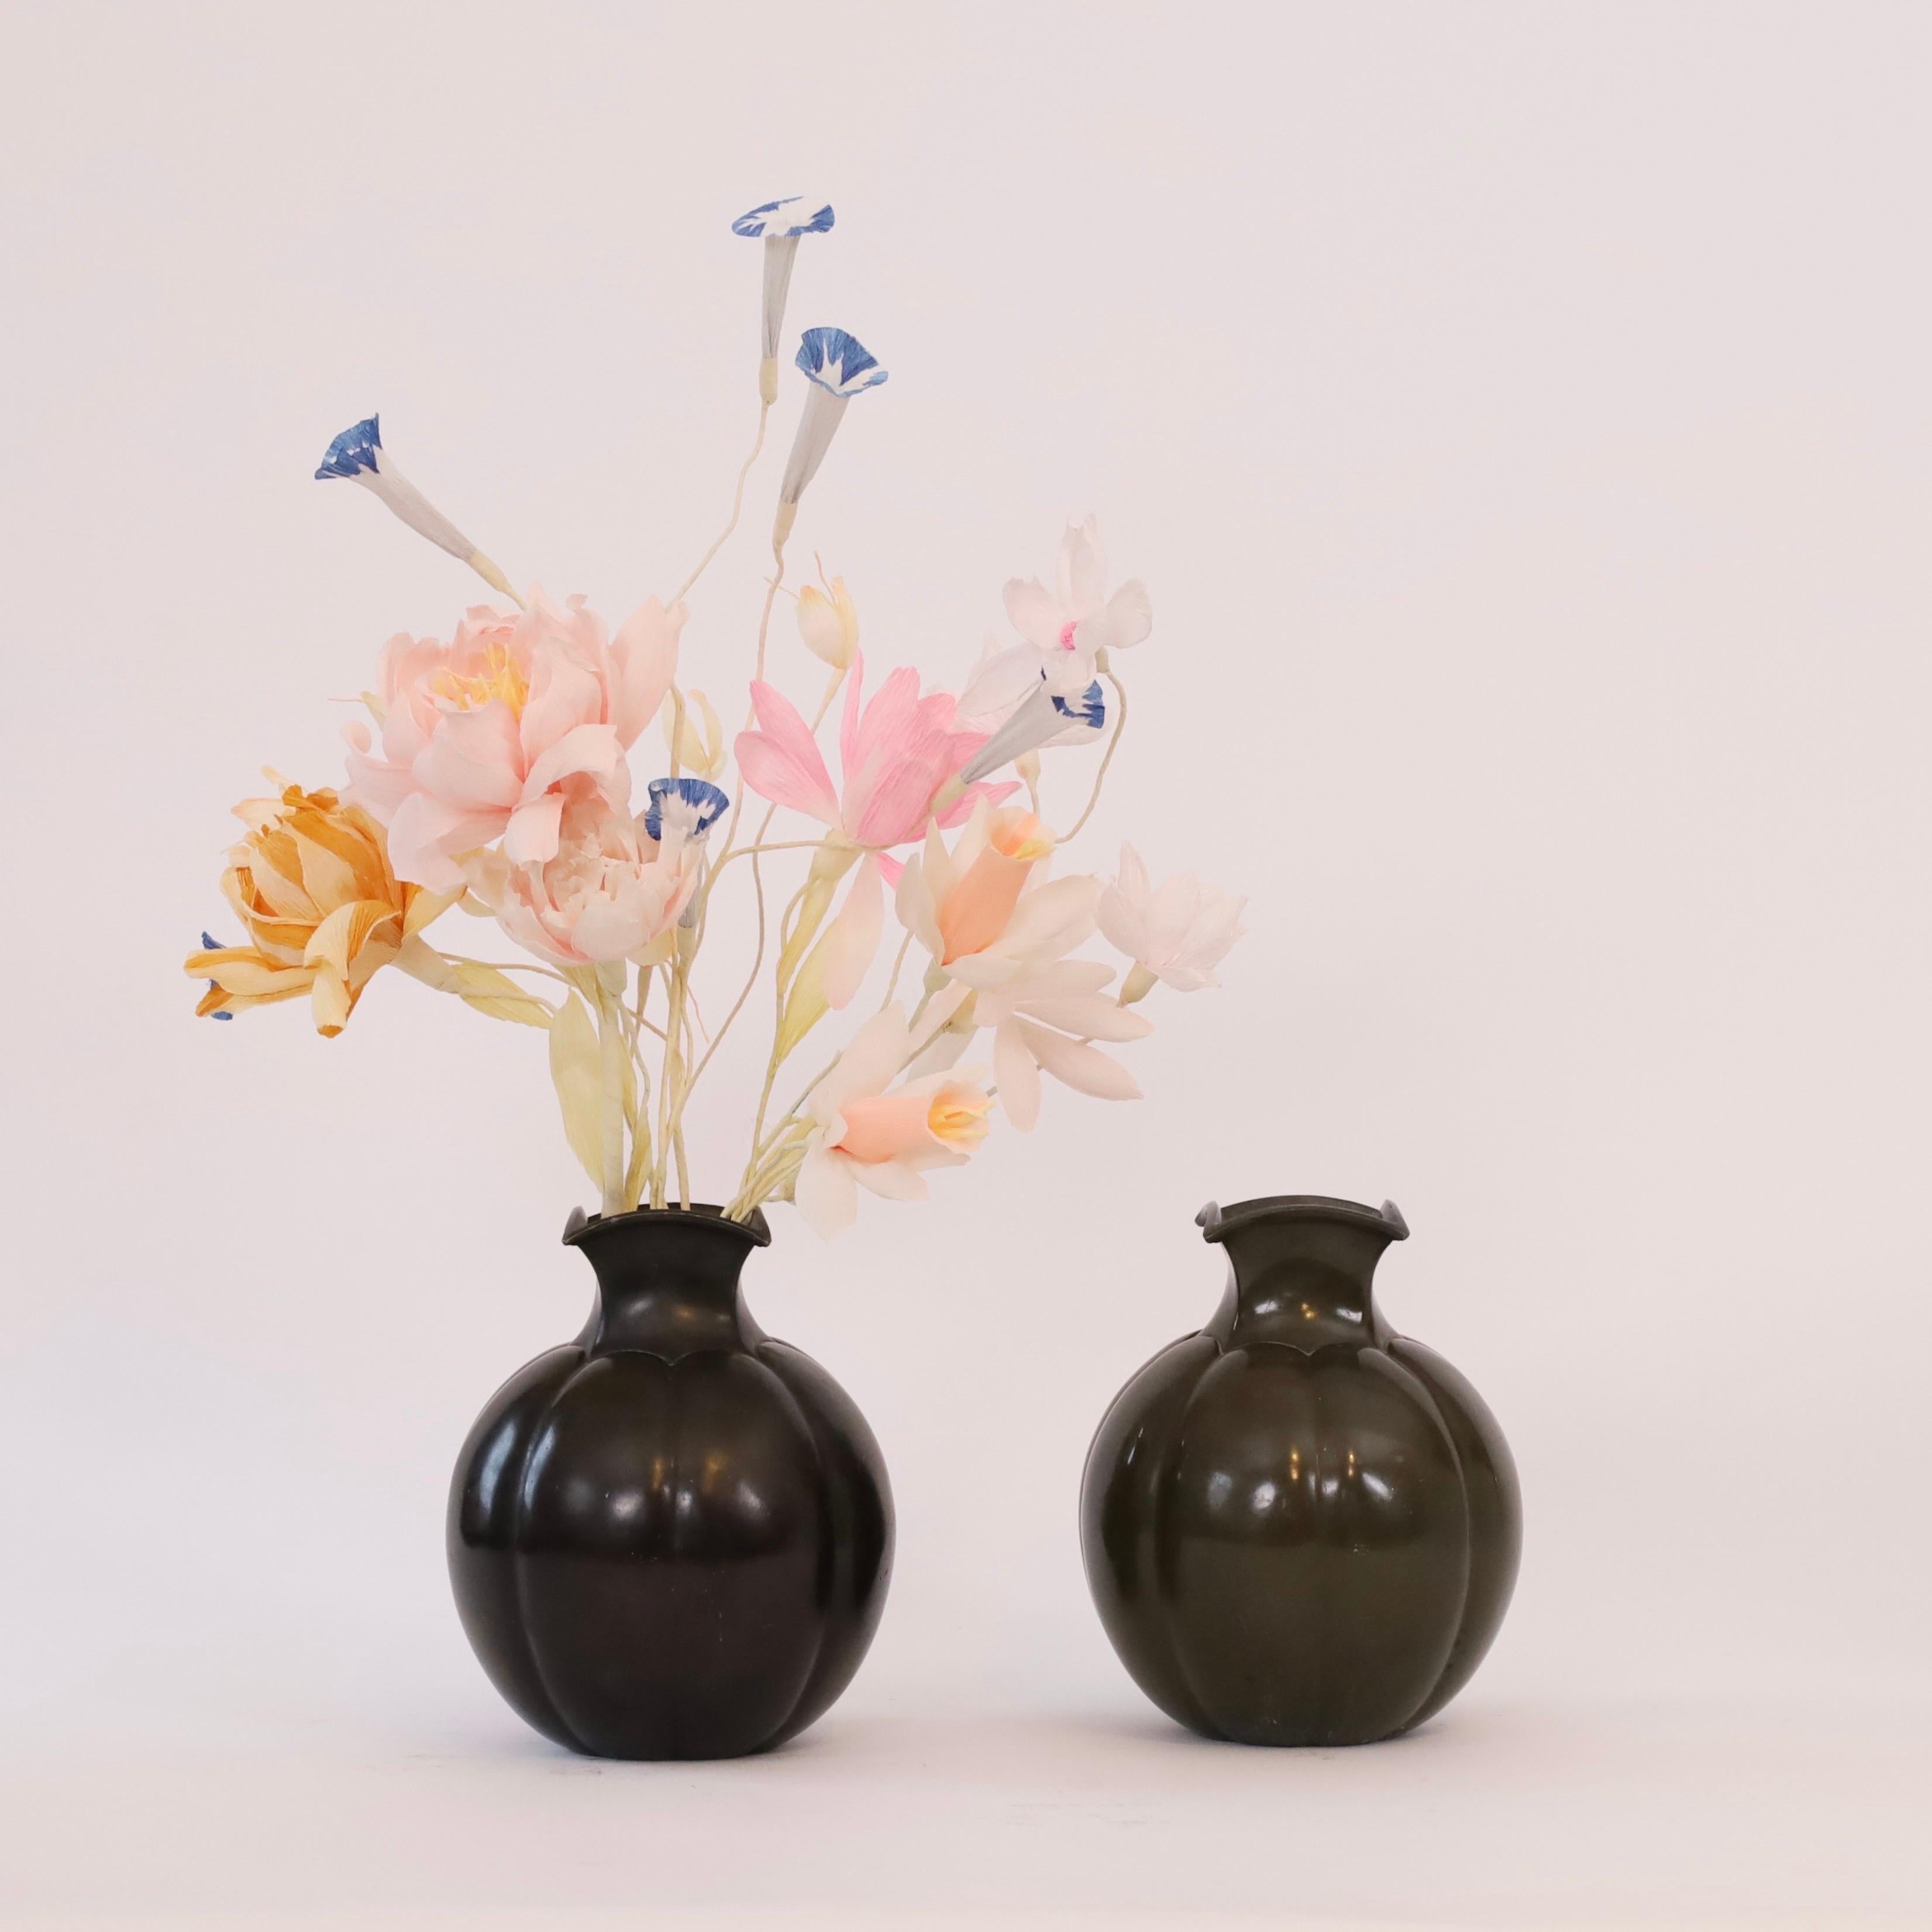 A set of substantial metal vases designed by Just Andersen in the 1930s. A rare, exquisite duo. 

* A set (2) of heavy round metal vases with square necks
* Designer: Just Andersen
* Model: D1754 (stamped 'Just D1754')
* Year: 1935
* Condition: Good